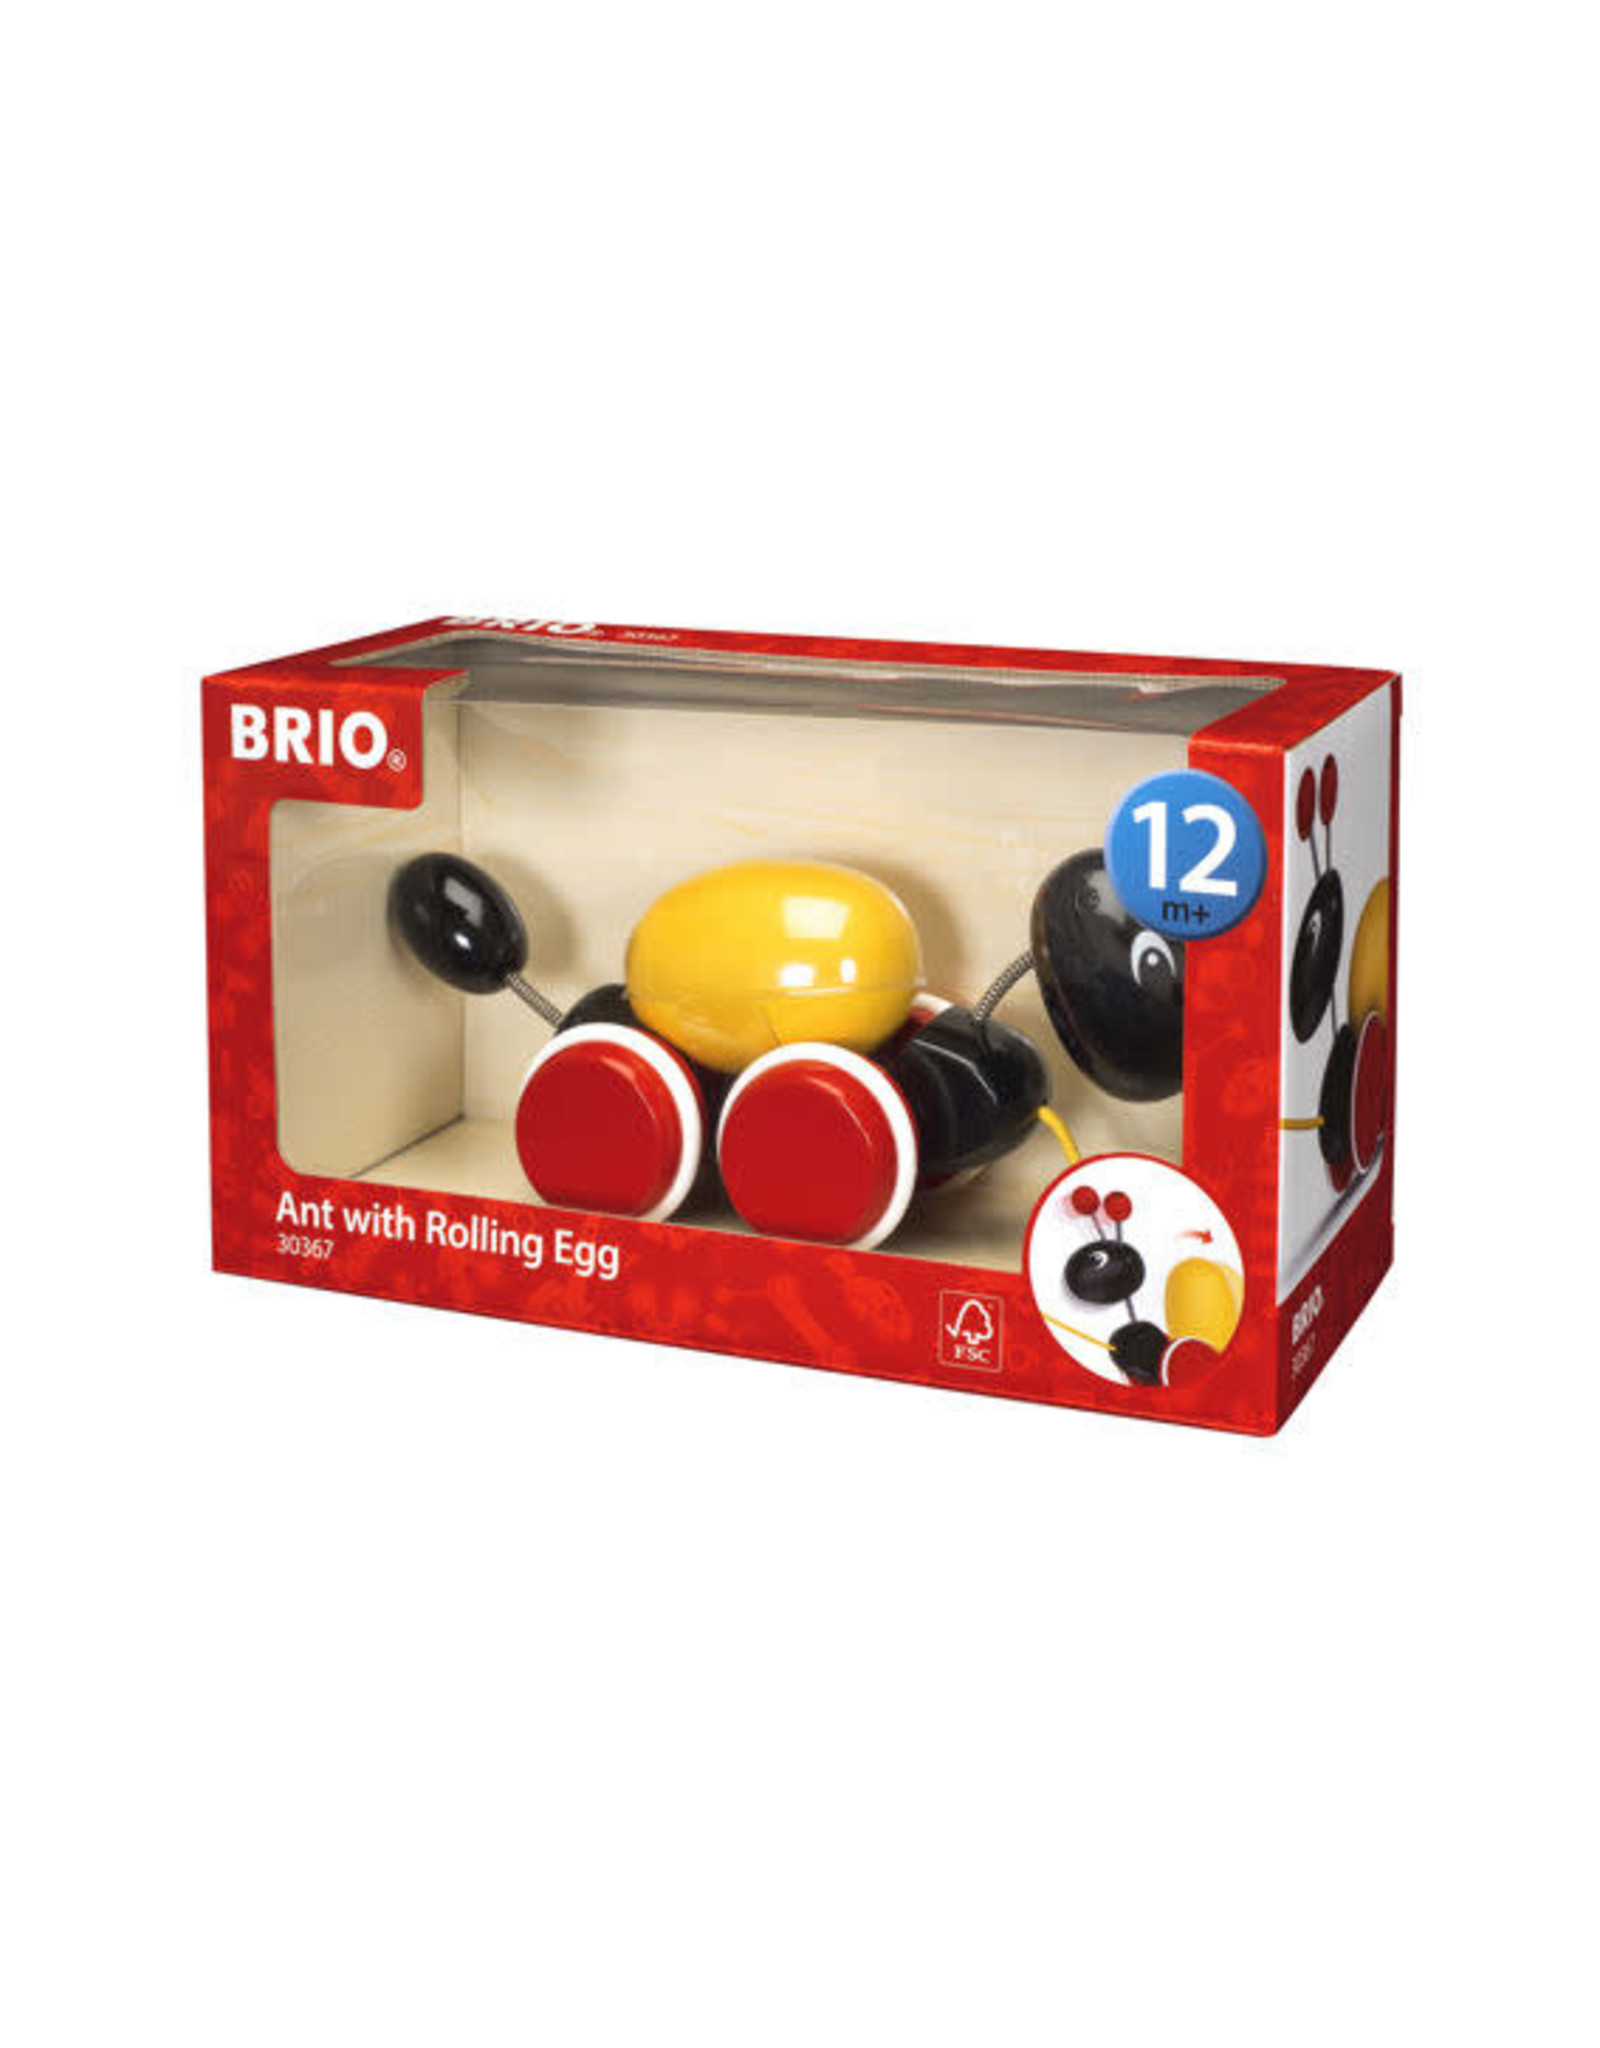 Brio Ant with Rolling Egg